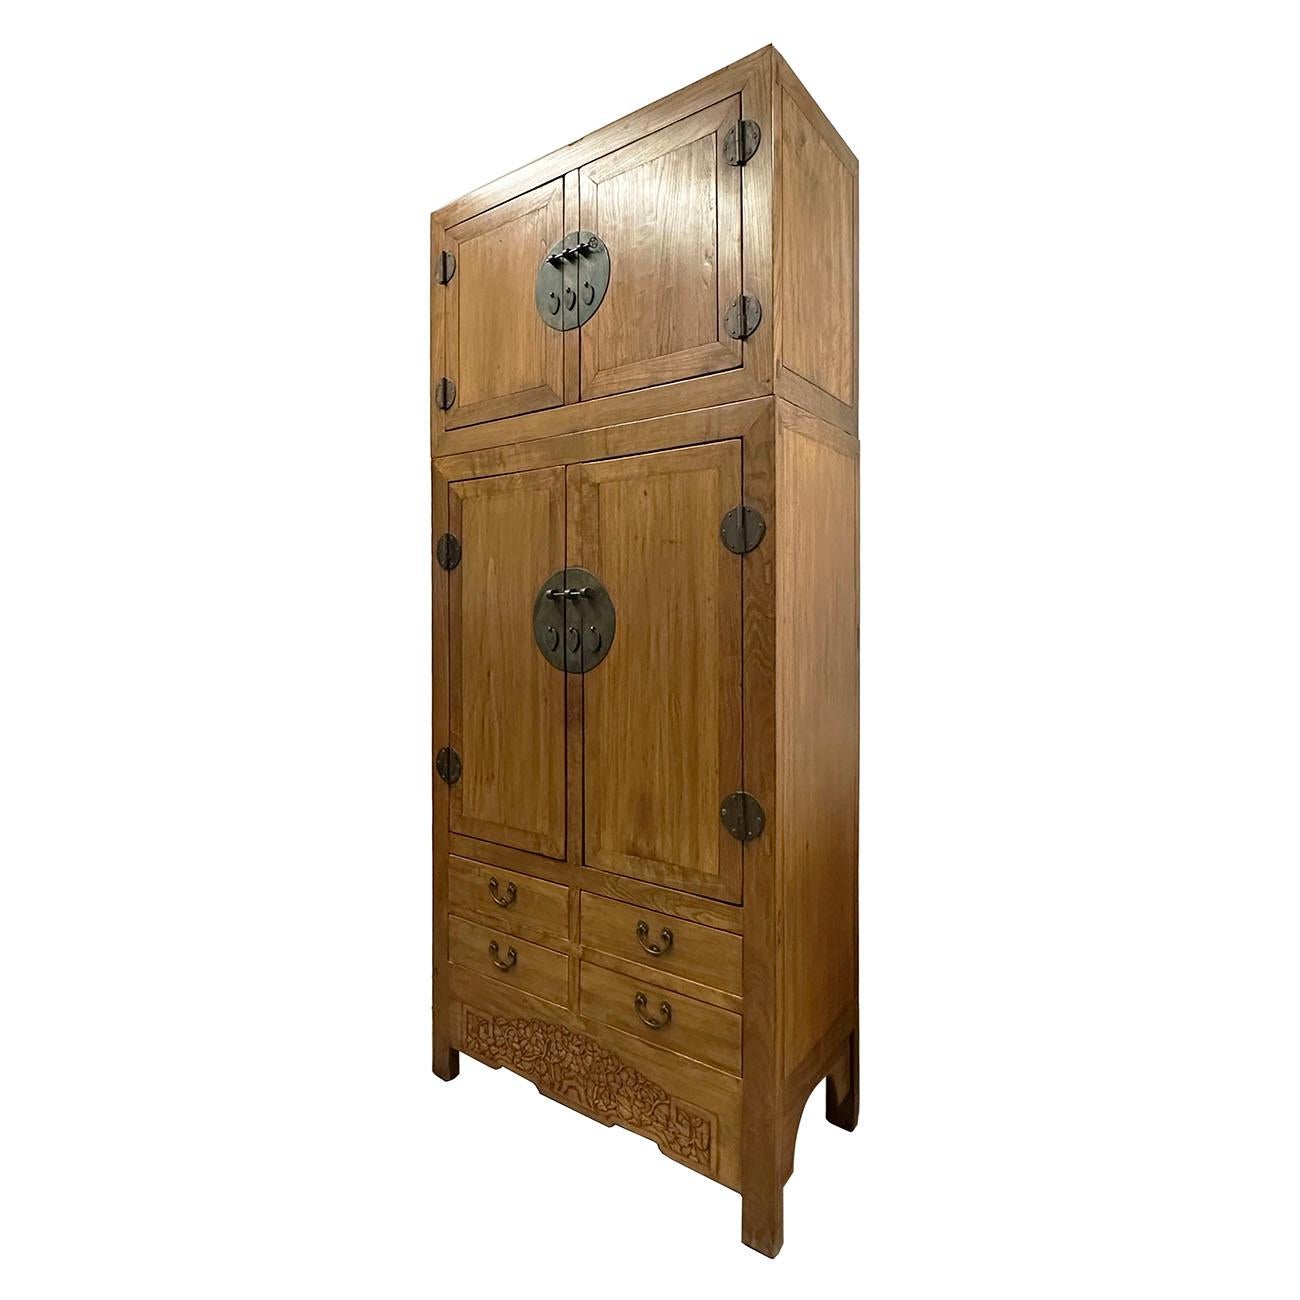 Of rectangular form, the well-figured, matched door panels fitted flush within the solidly constructed frame, simple flat door panels with natural wood grain on the front. This wedding wardrobe in two parts, with two sets of double doors, both with